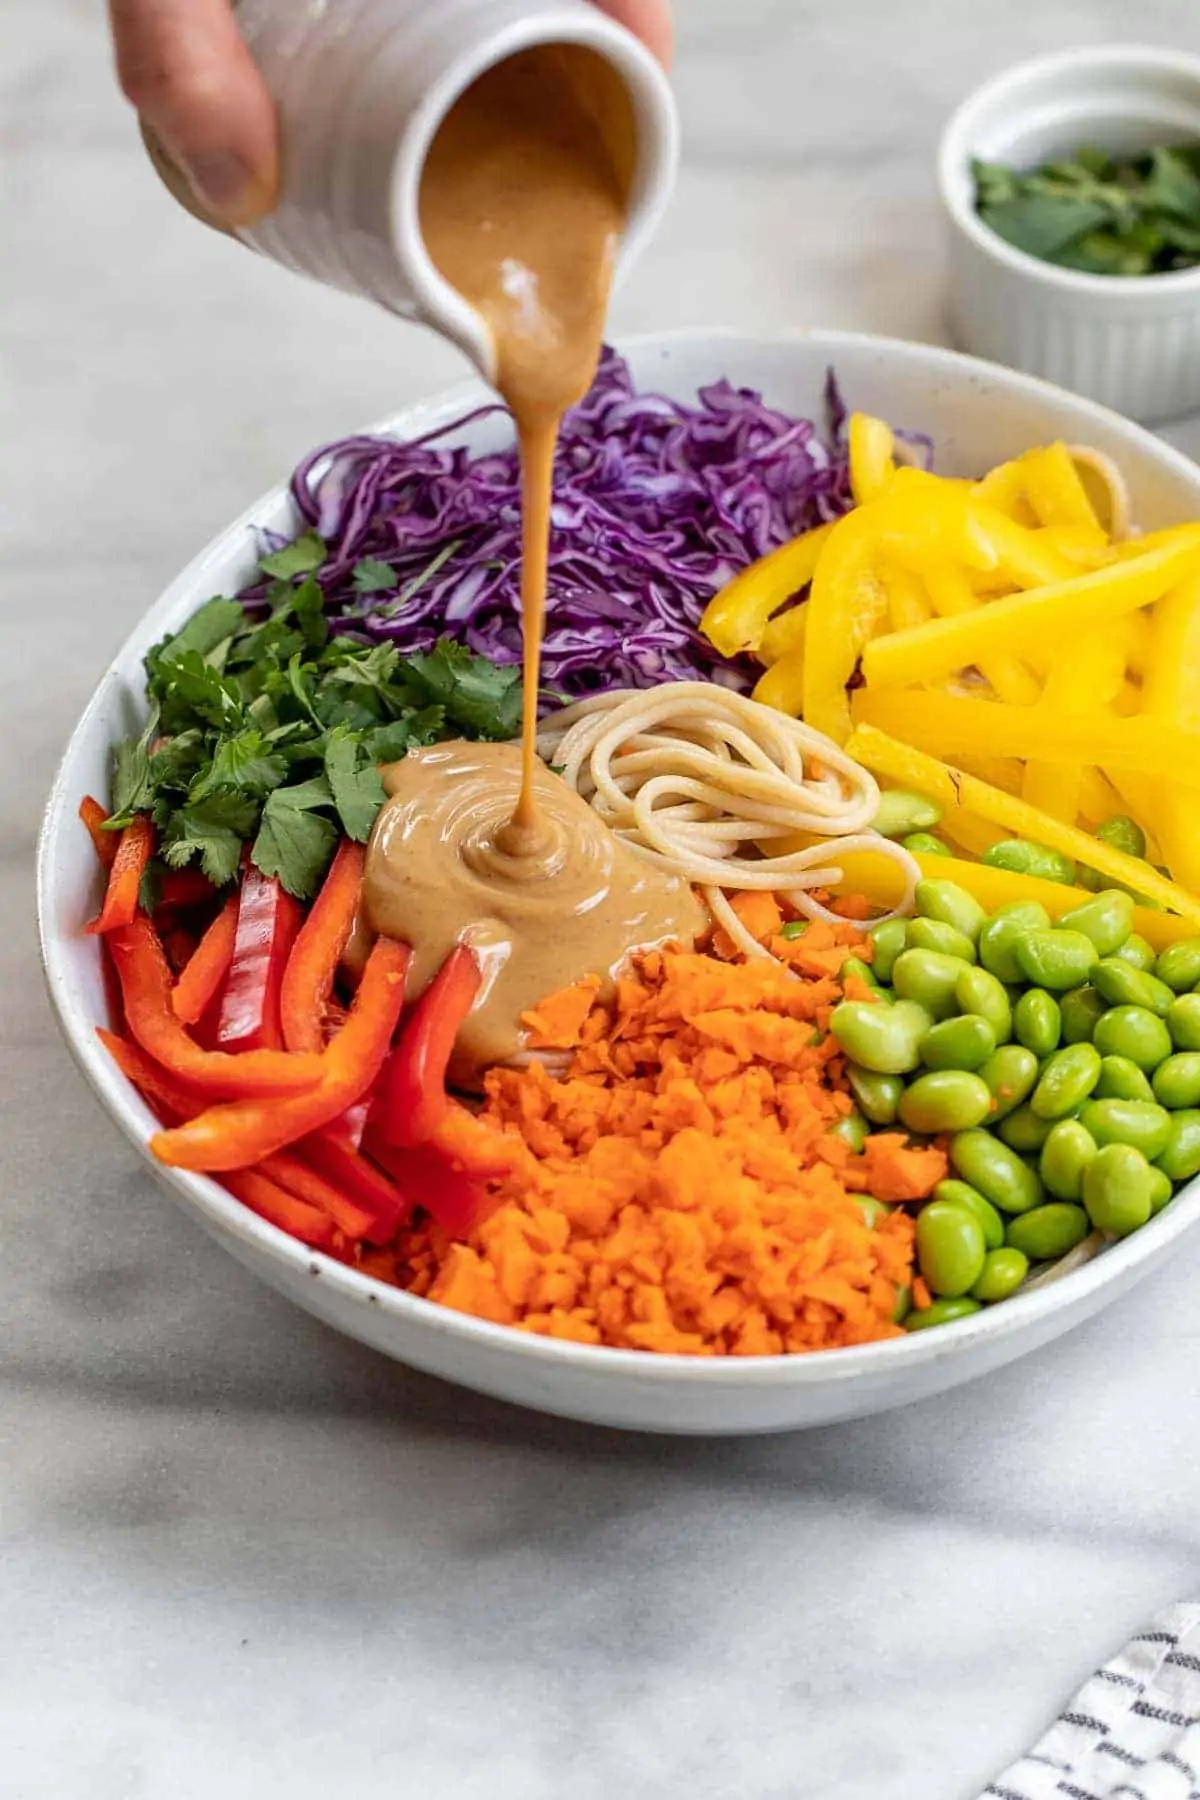 Pouring the thai peanut sauce over the noodles and veggies.